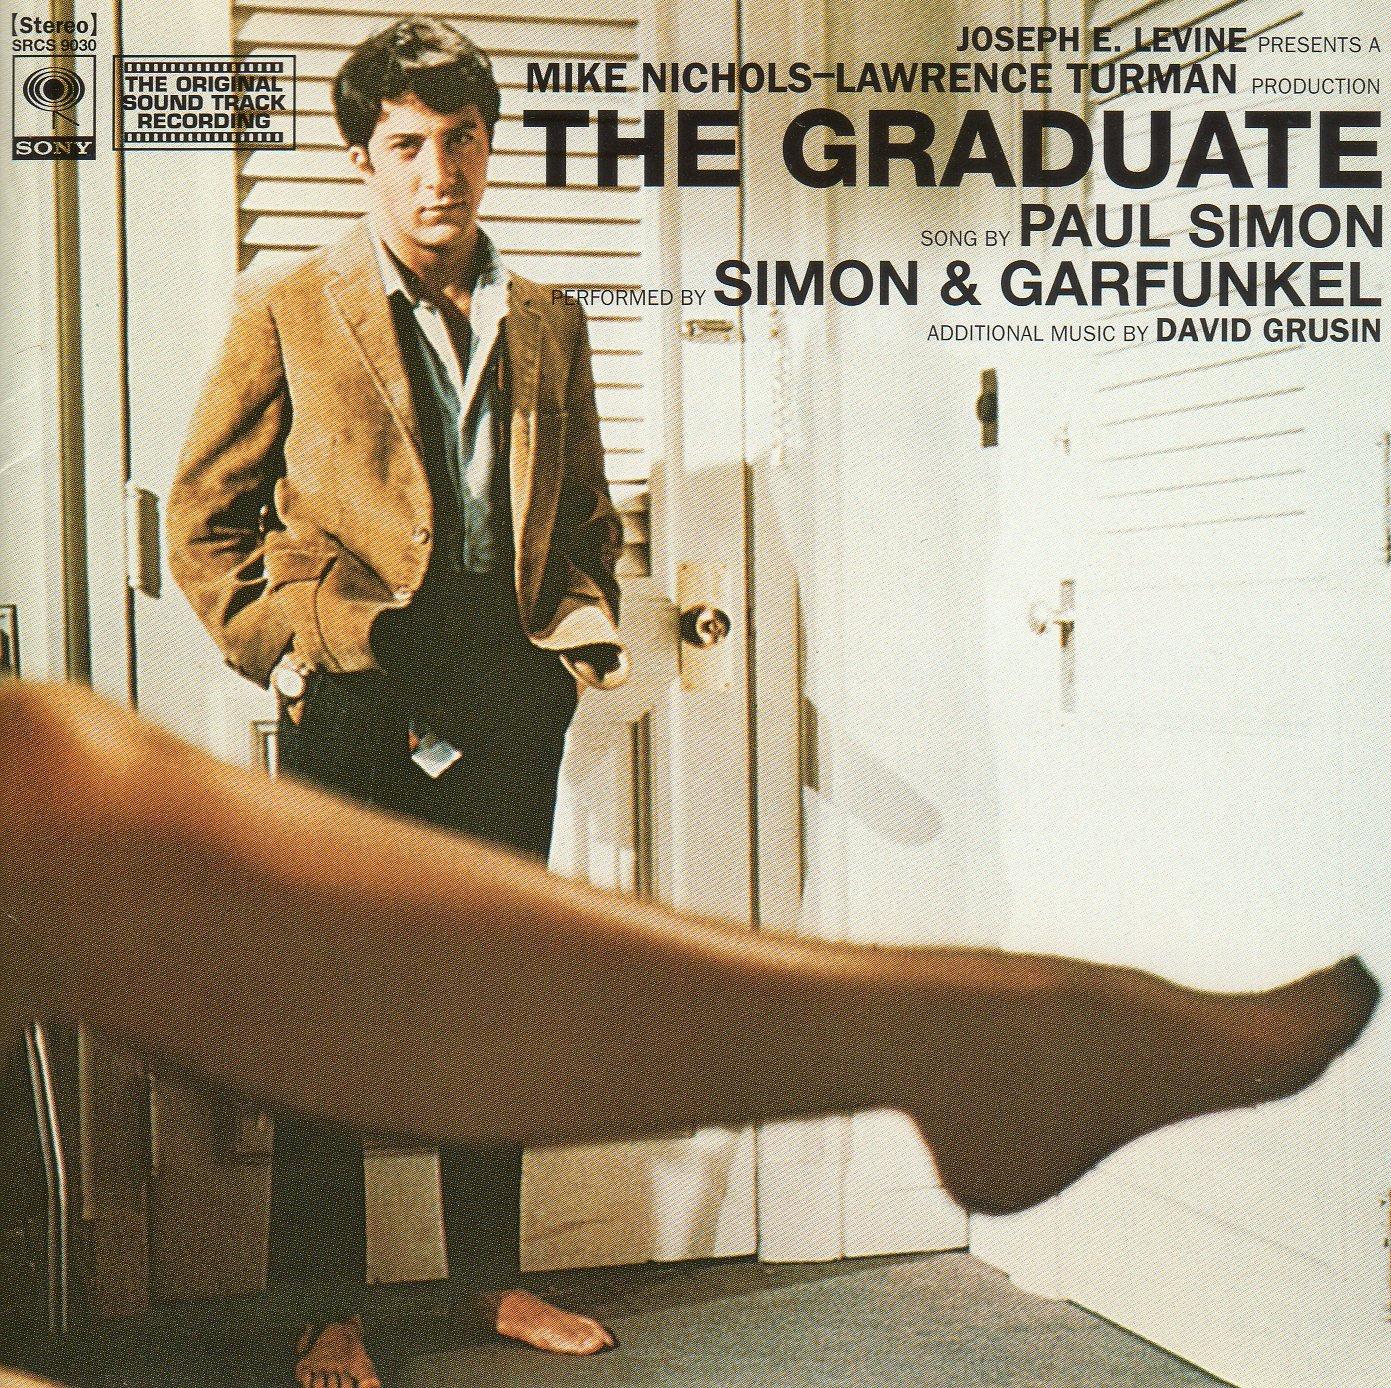 The cover for The Graduate soundtrack